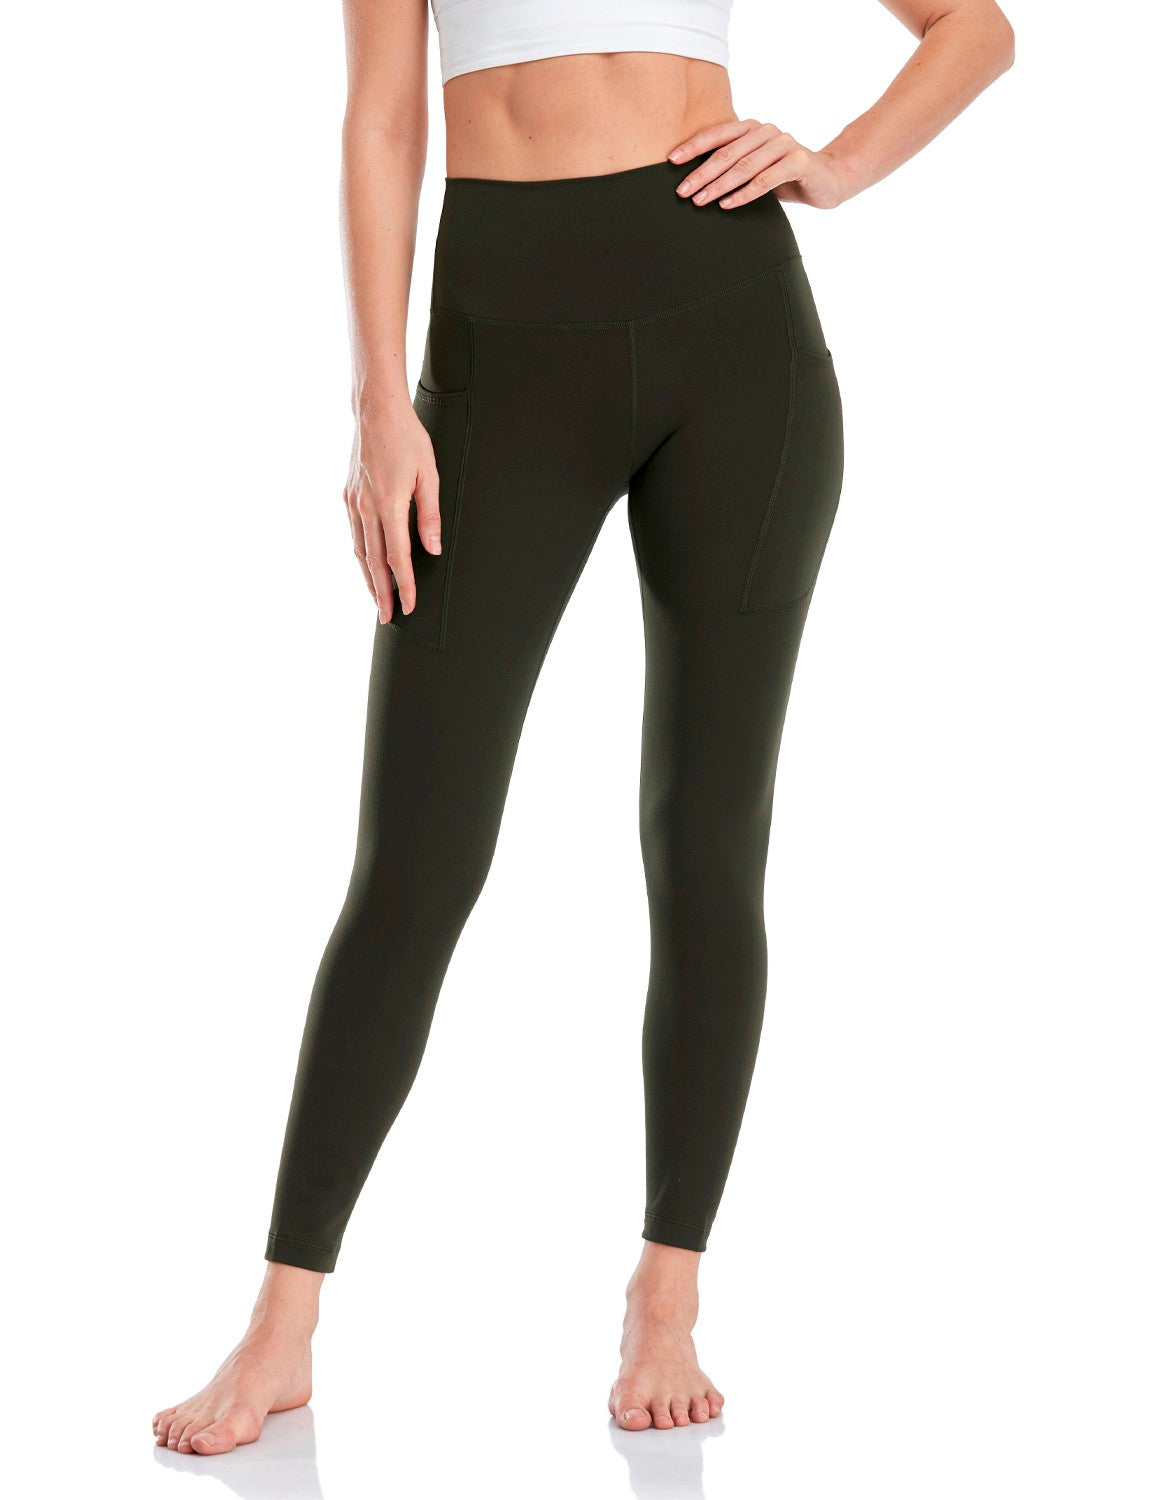  HeyNuts Pure&Plain 7/8 High Waisted Leggings for Women,  Athletic Compression Tummy Control Workout Yoga Pants 25'' Java Coffee  XXS(00) : Clothing, Shoes & Jewelry